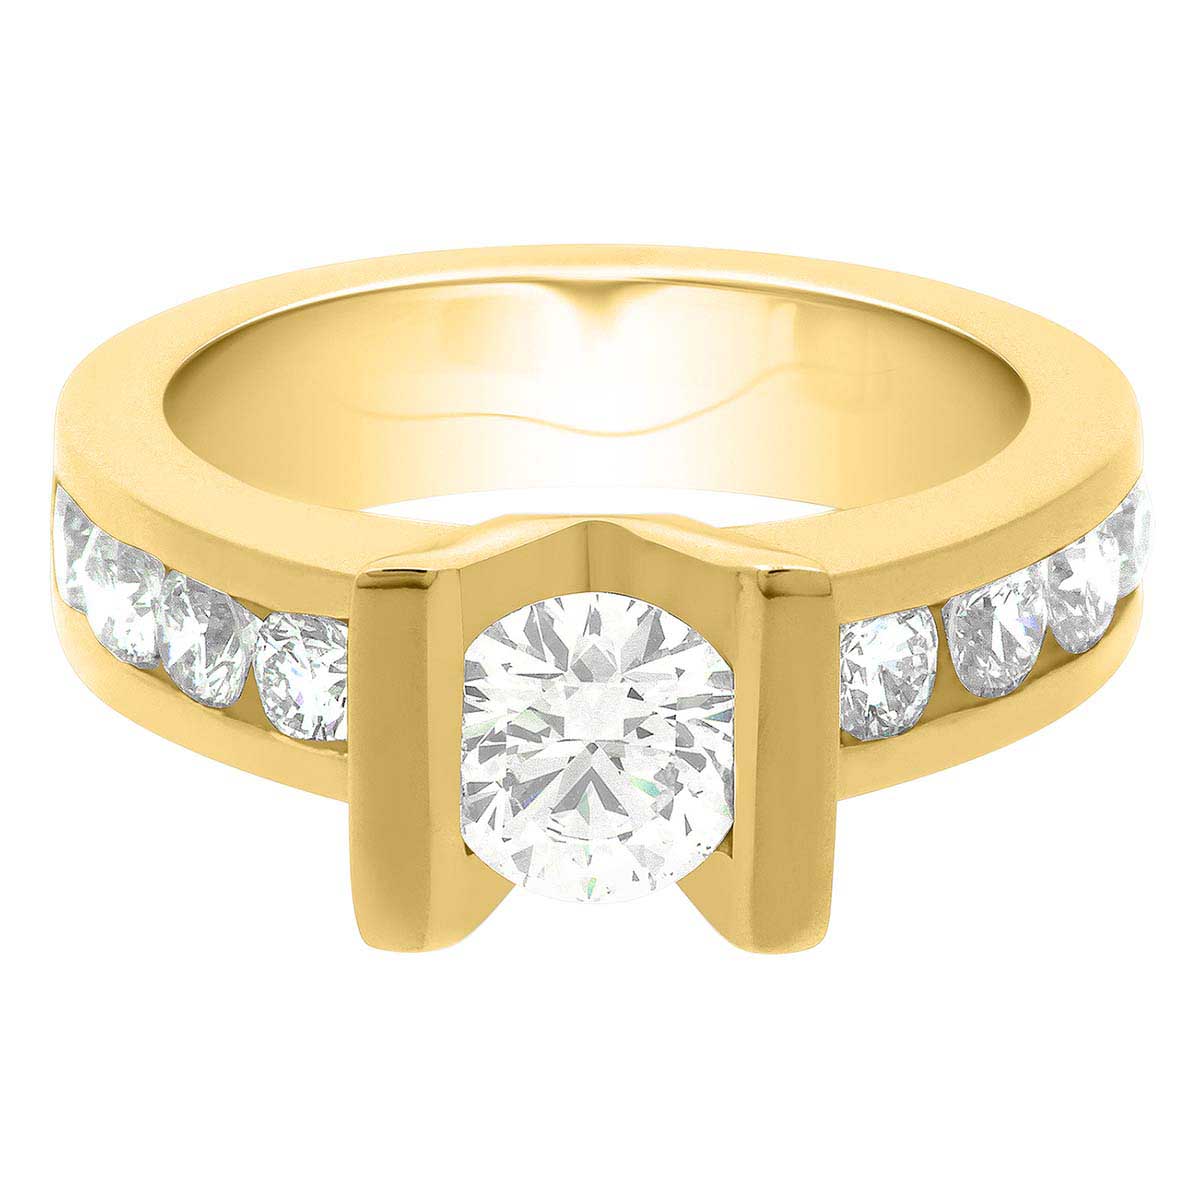 Custom Made Engagement Ring made from yellow gold